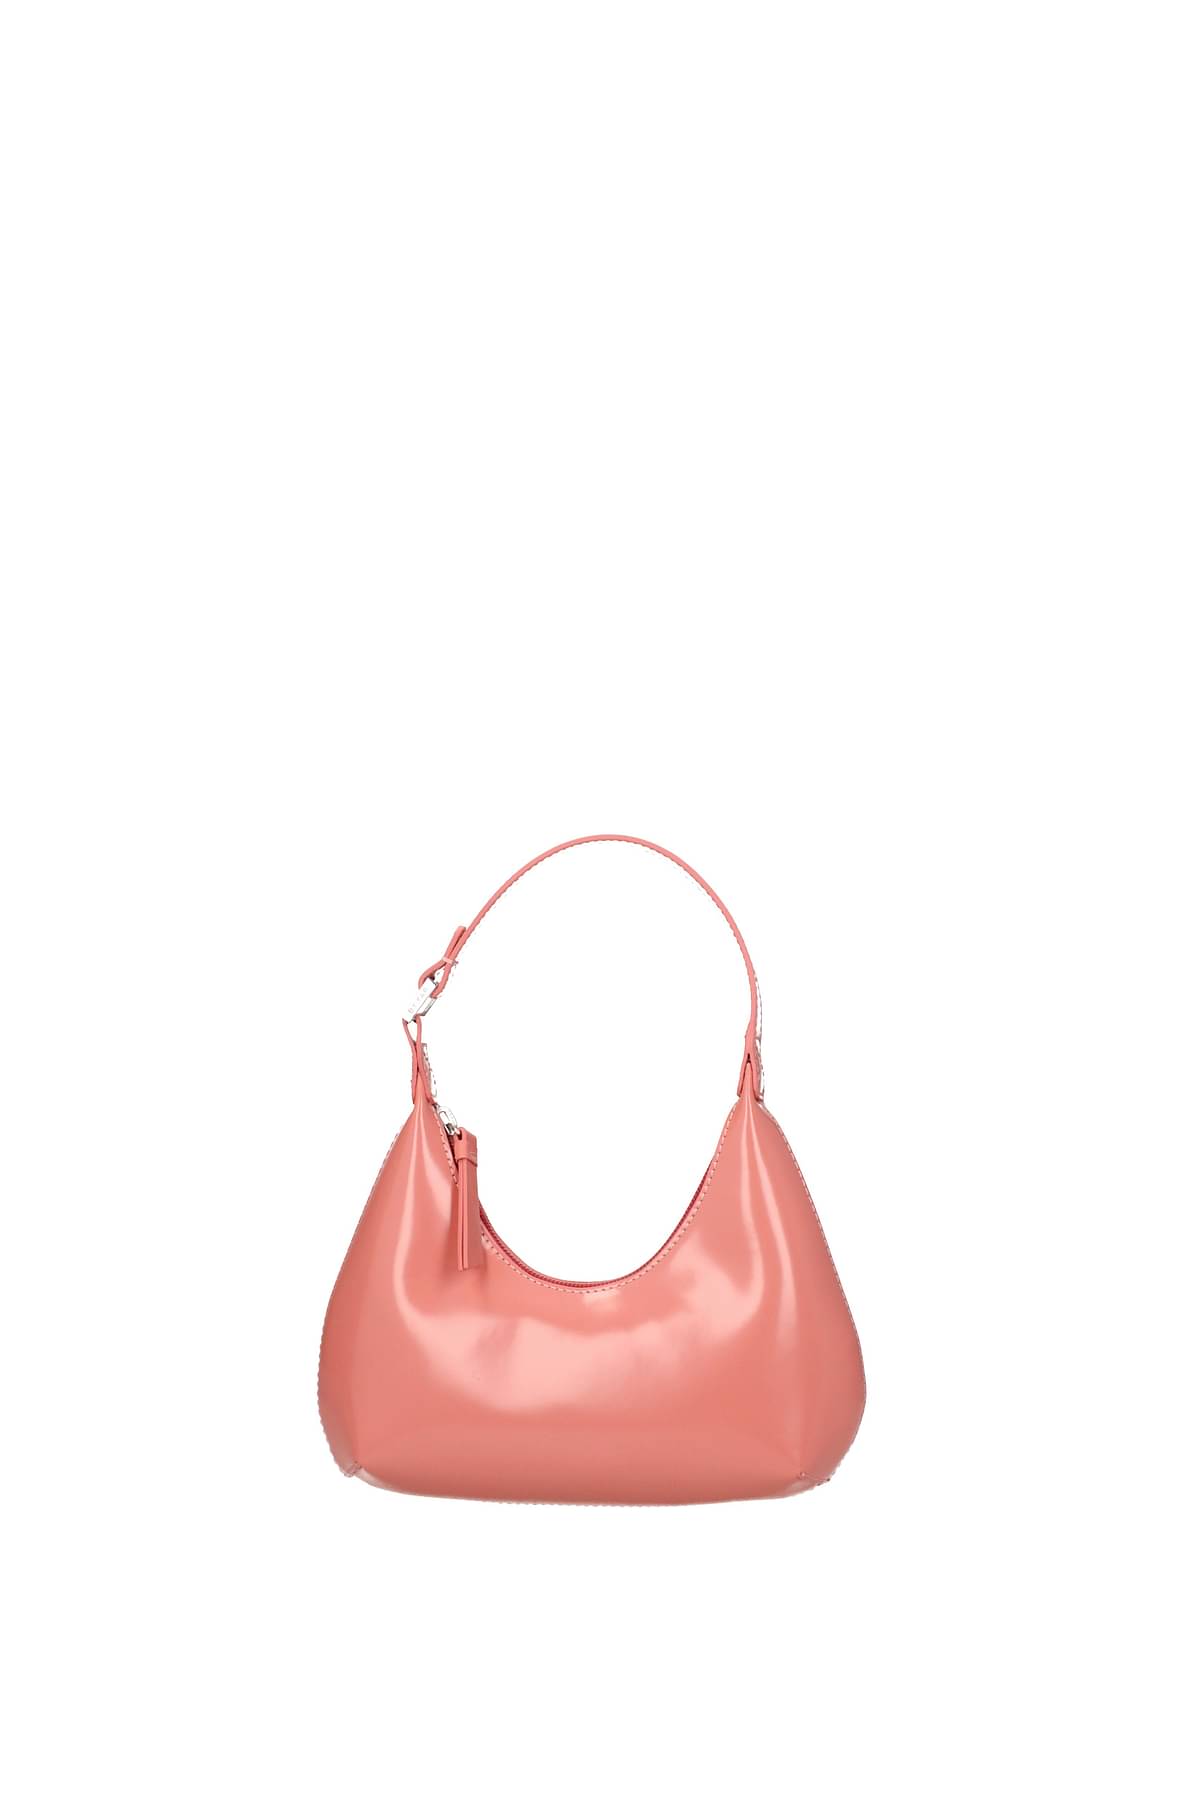 Amber semi patent leather shoulder bag - BY FAR - Women